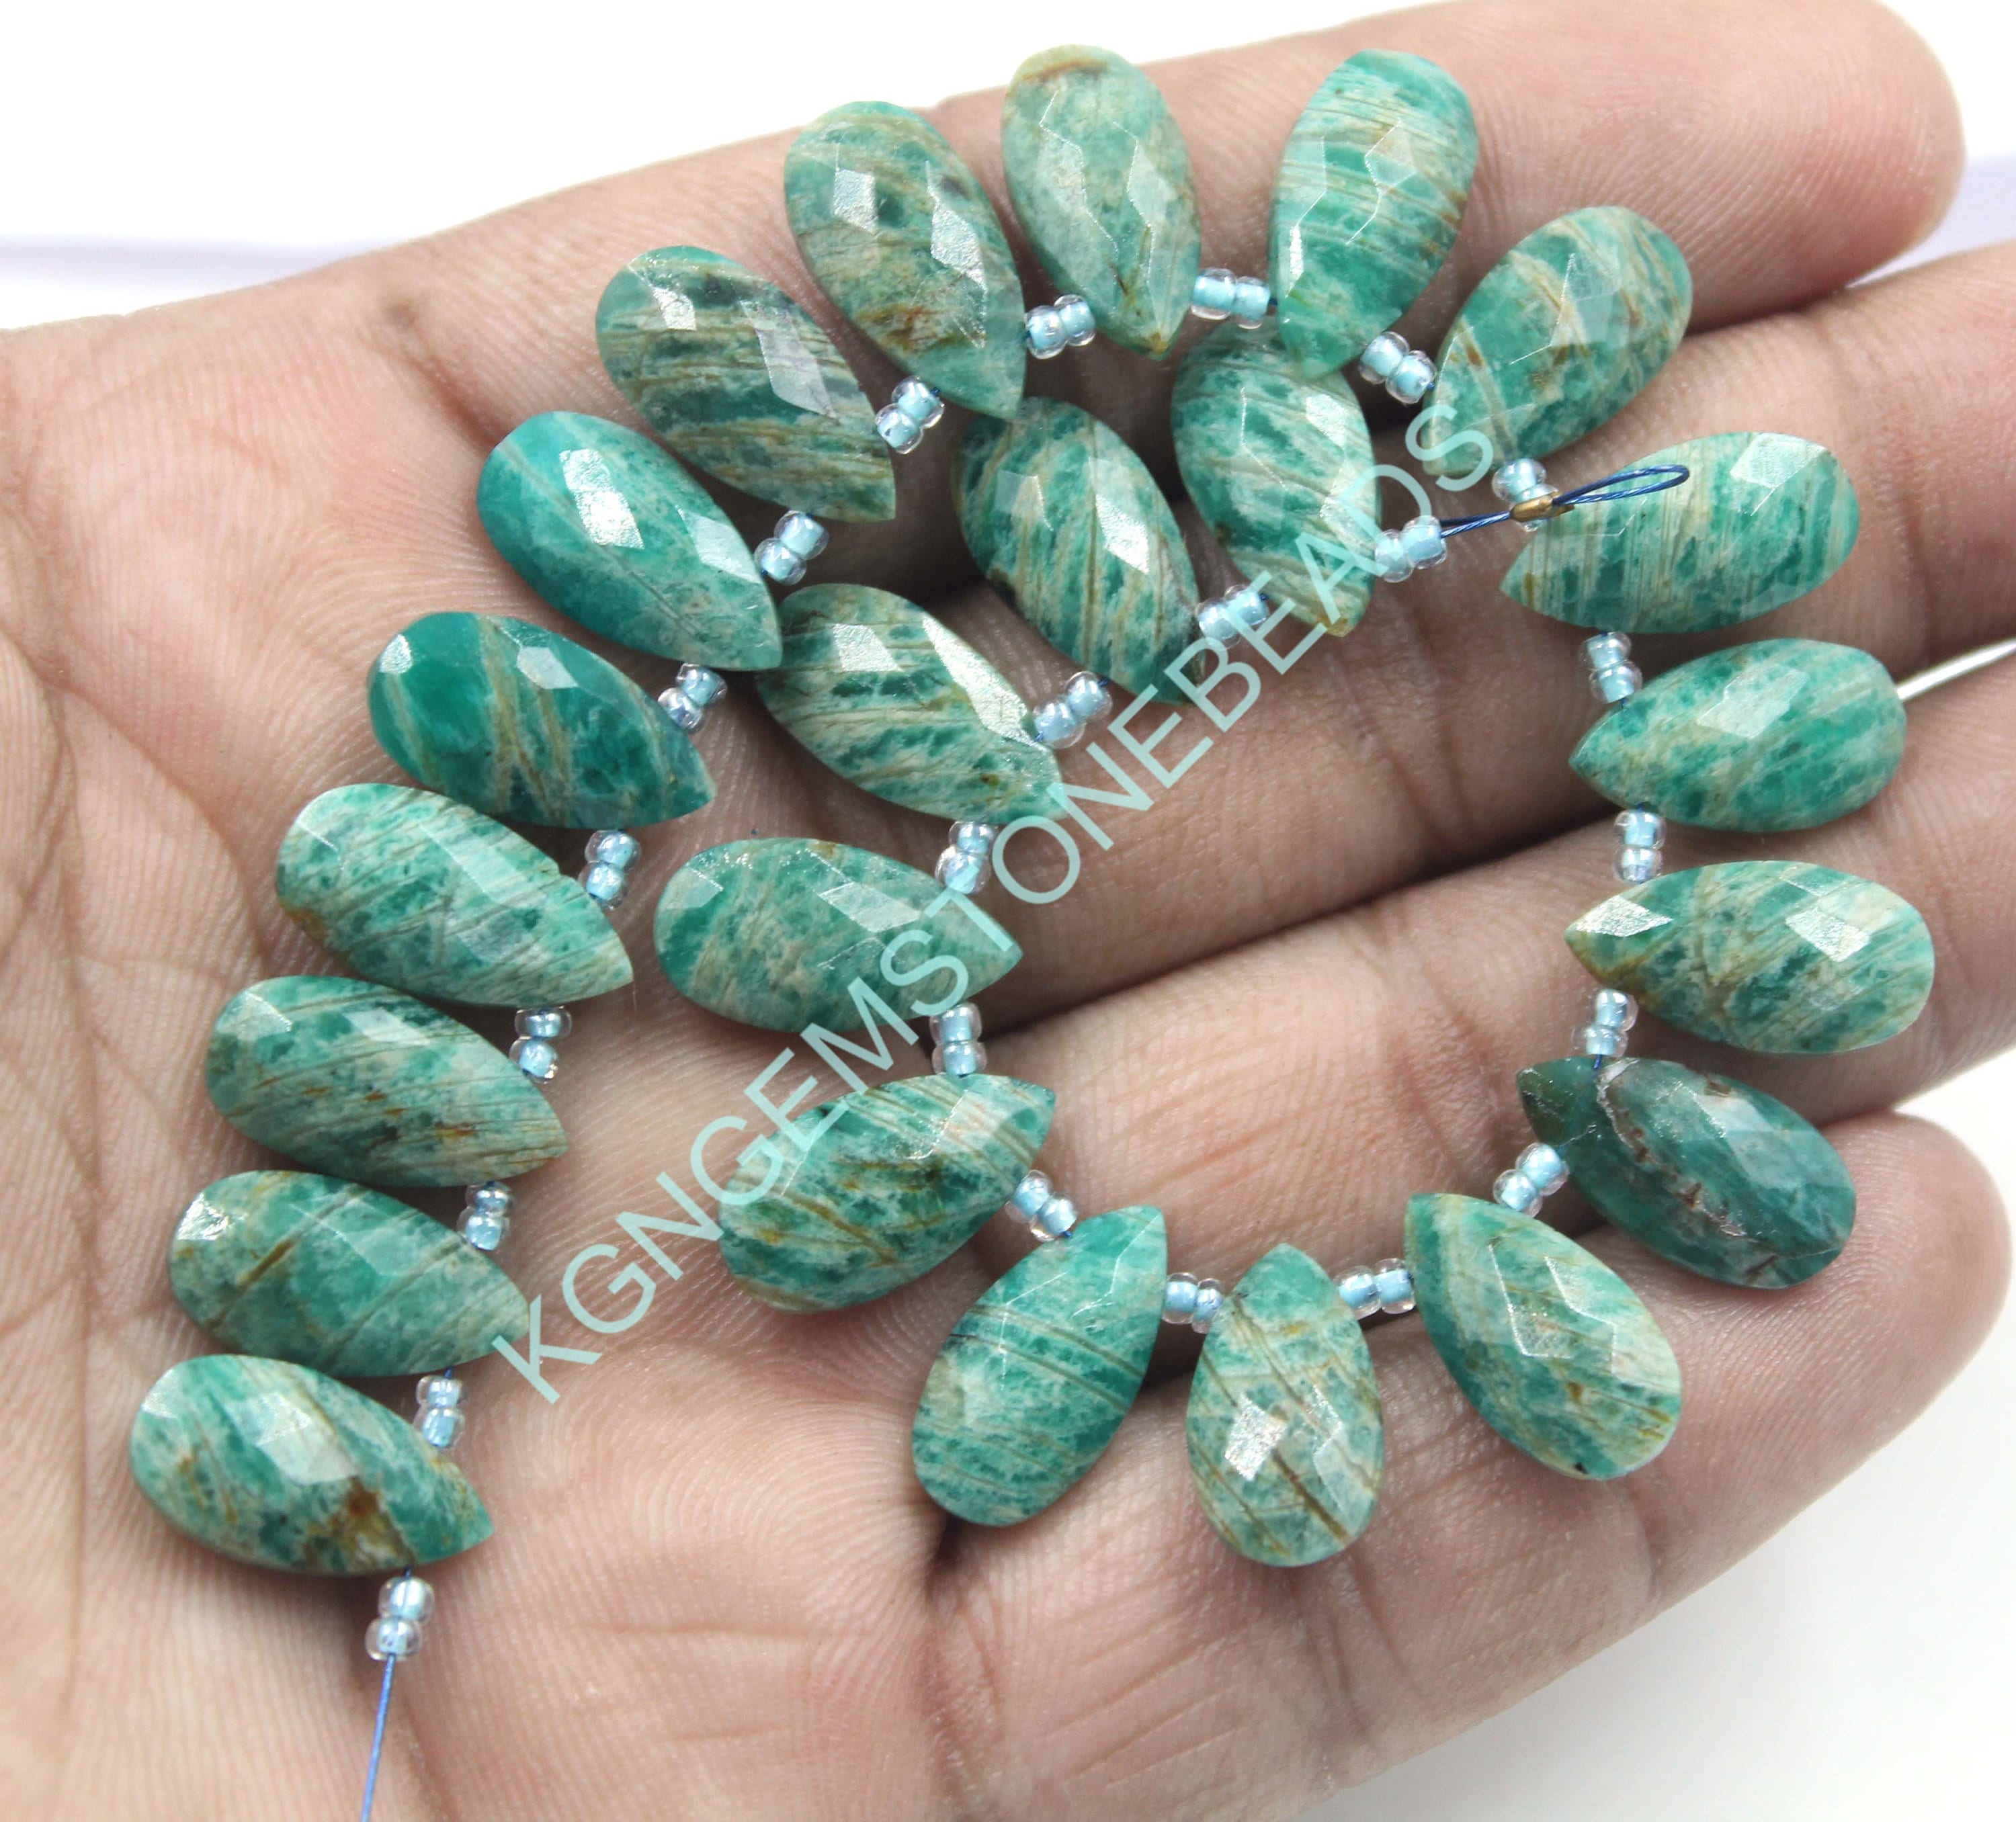 Amazonite Beads Top Drilled Gemstone Size,10x16 MM Polished Stone Natural Amazonite Great Quality Stone Pear Shape Stone 10 Pieces